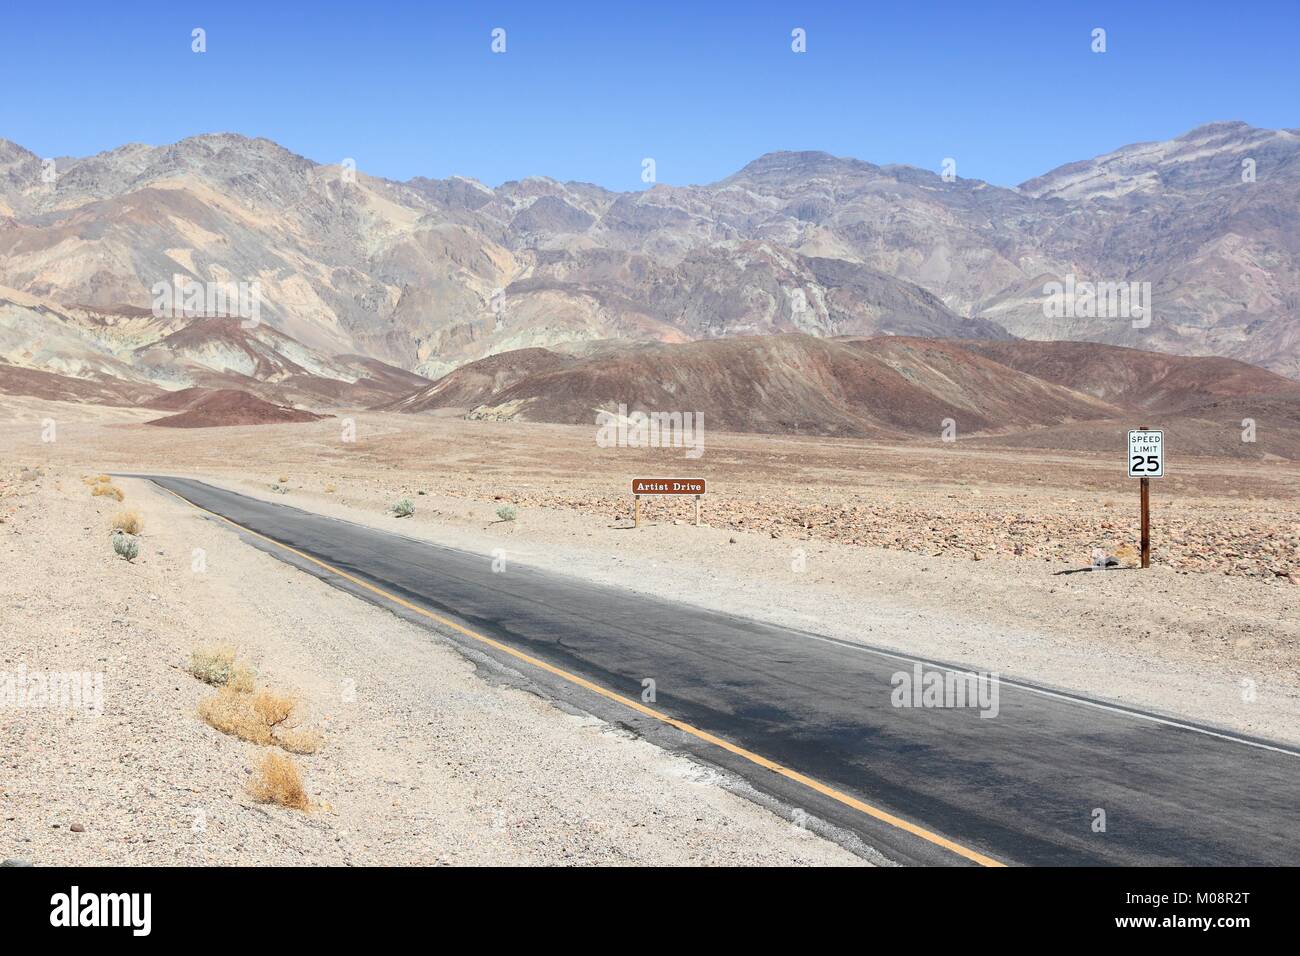 Mojave Desert in California, United States. Scenic view of famous Artist Drive in Death Valley National Park (Inyo County). It is an alluvial fan of B Stock Photo